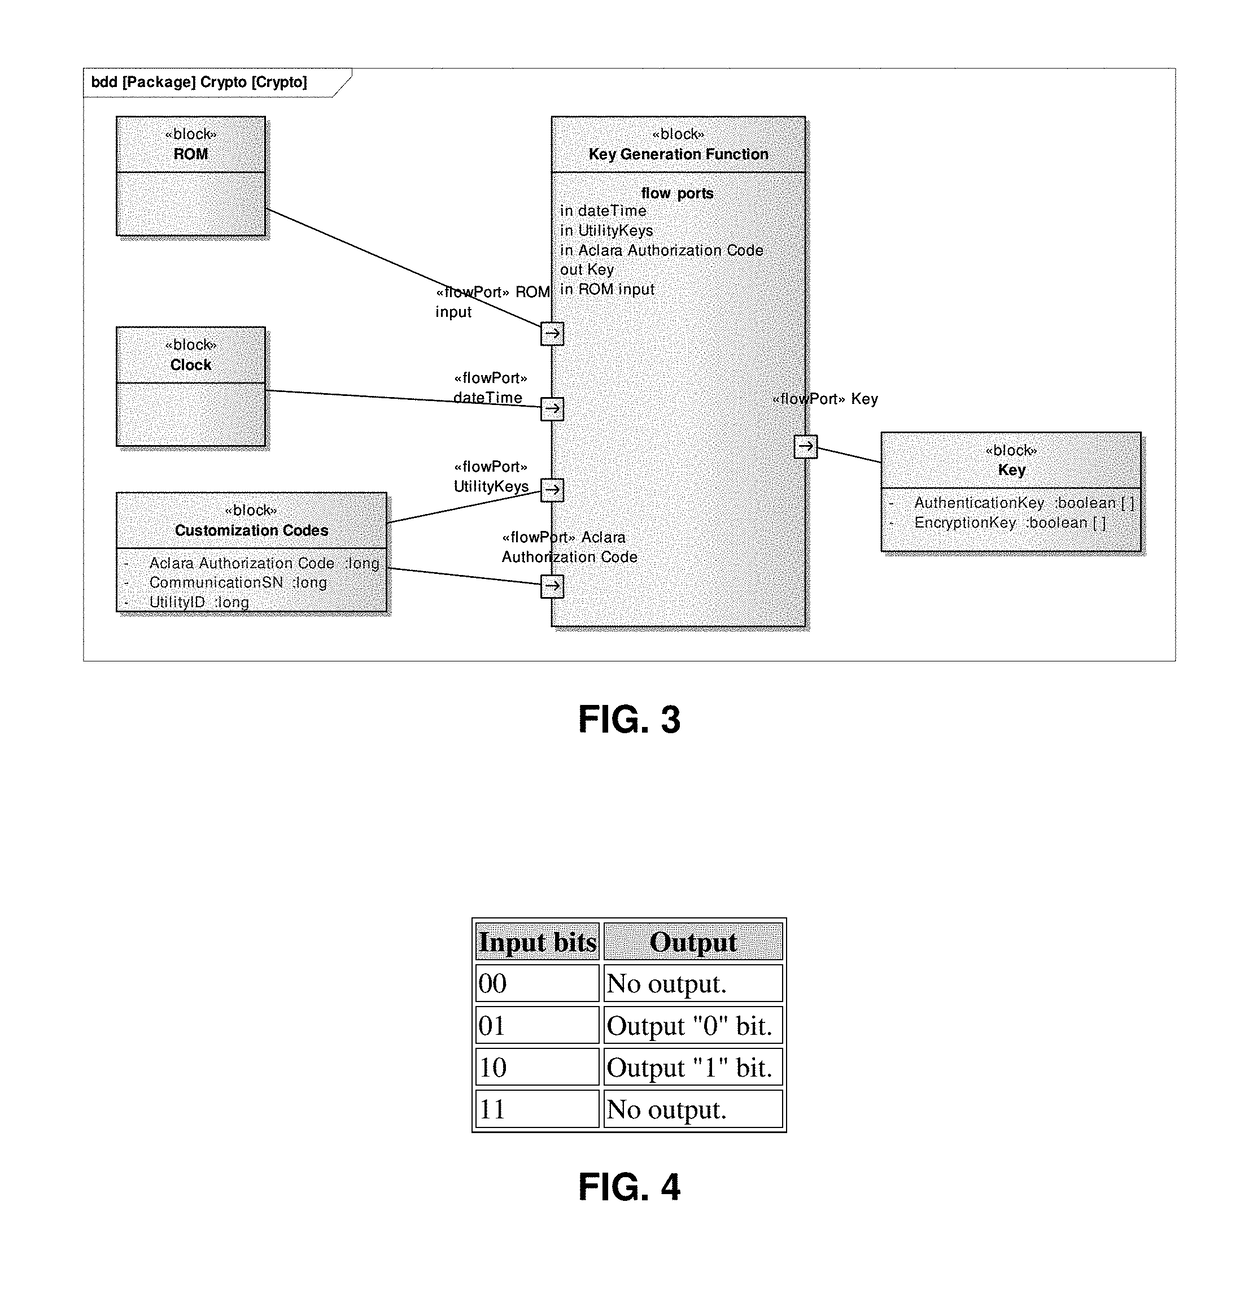 Method for generating cryptographic “one-time pads” and keys for secure network communications